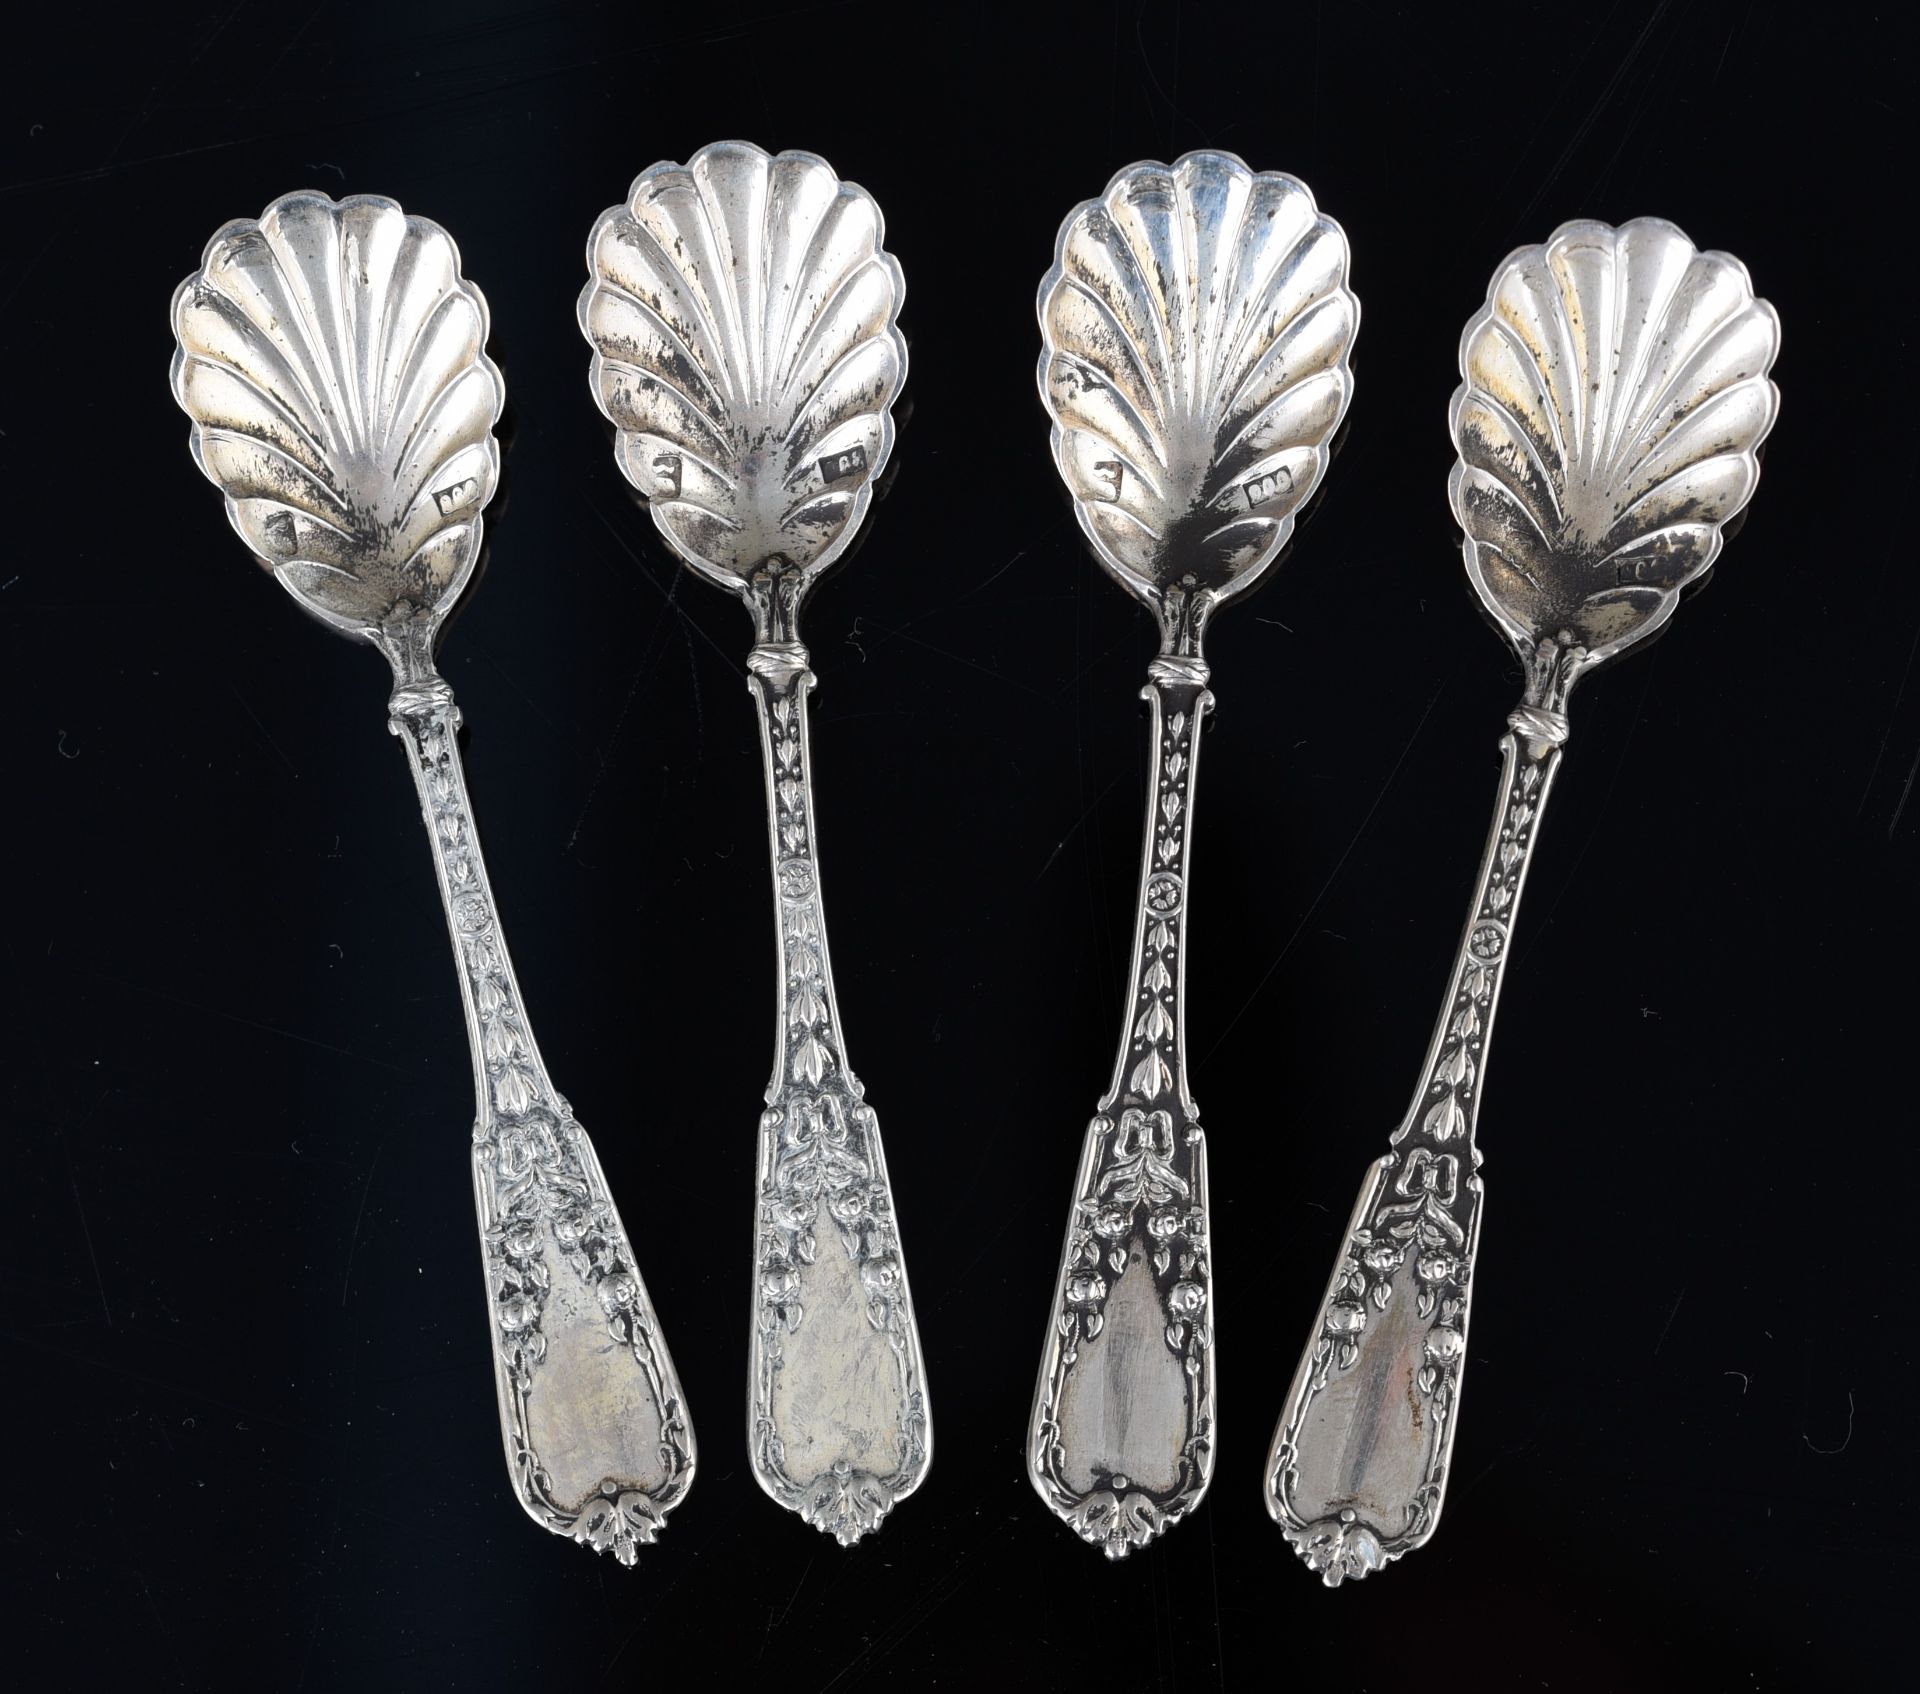 Two silver platters and four salts, Delheid Freres - Belgium, H 4,5 - dia 20 cm, weight: ca 757 g - Image 9 of 25